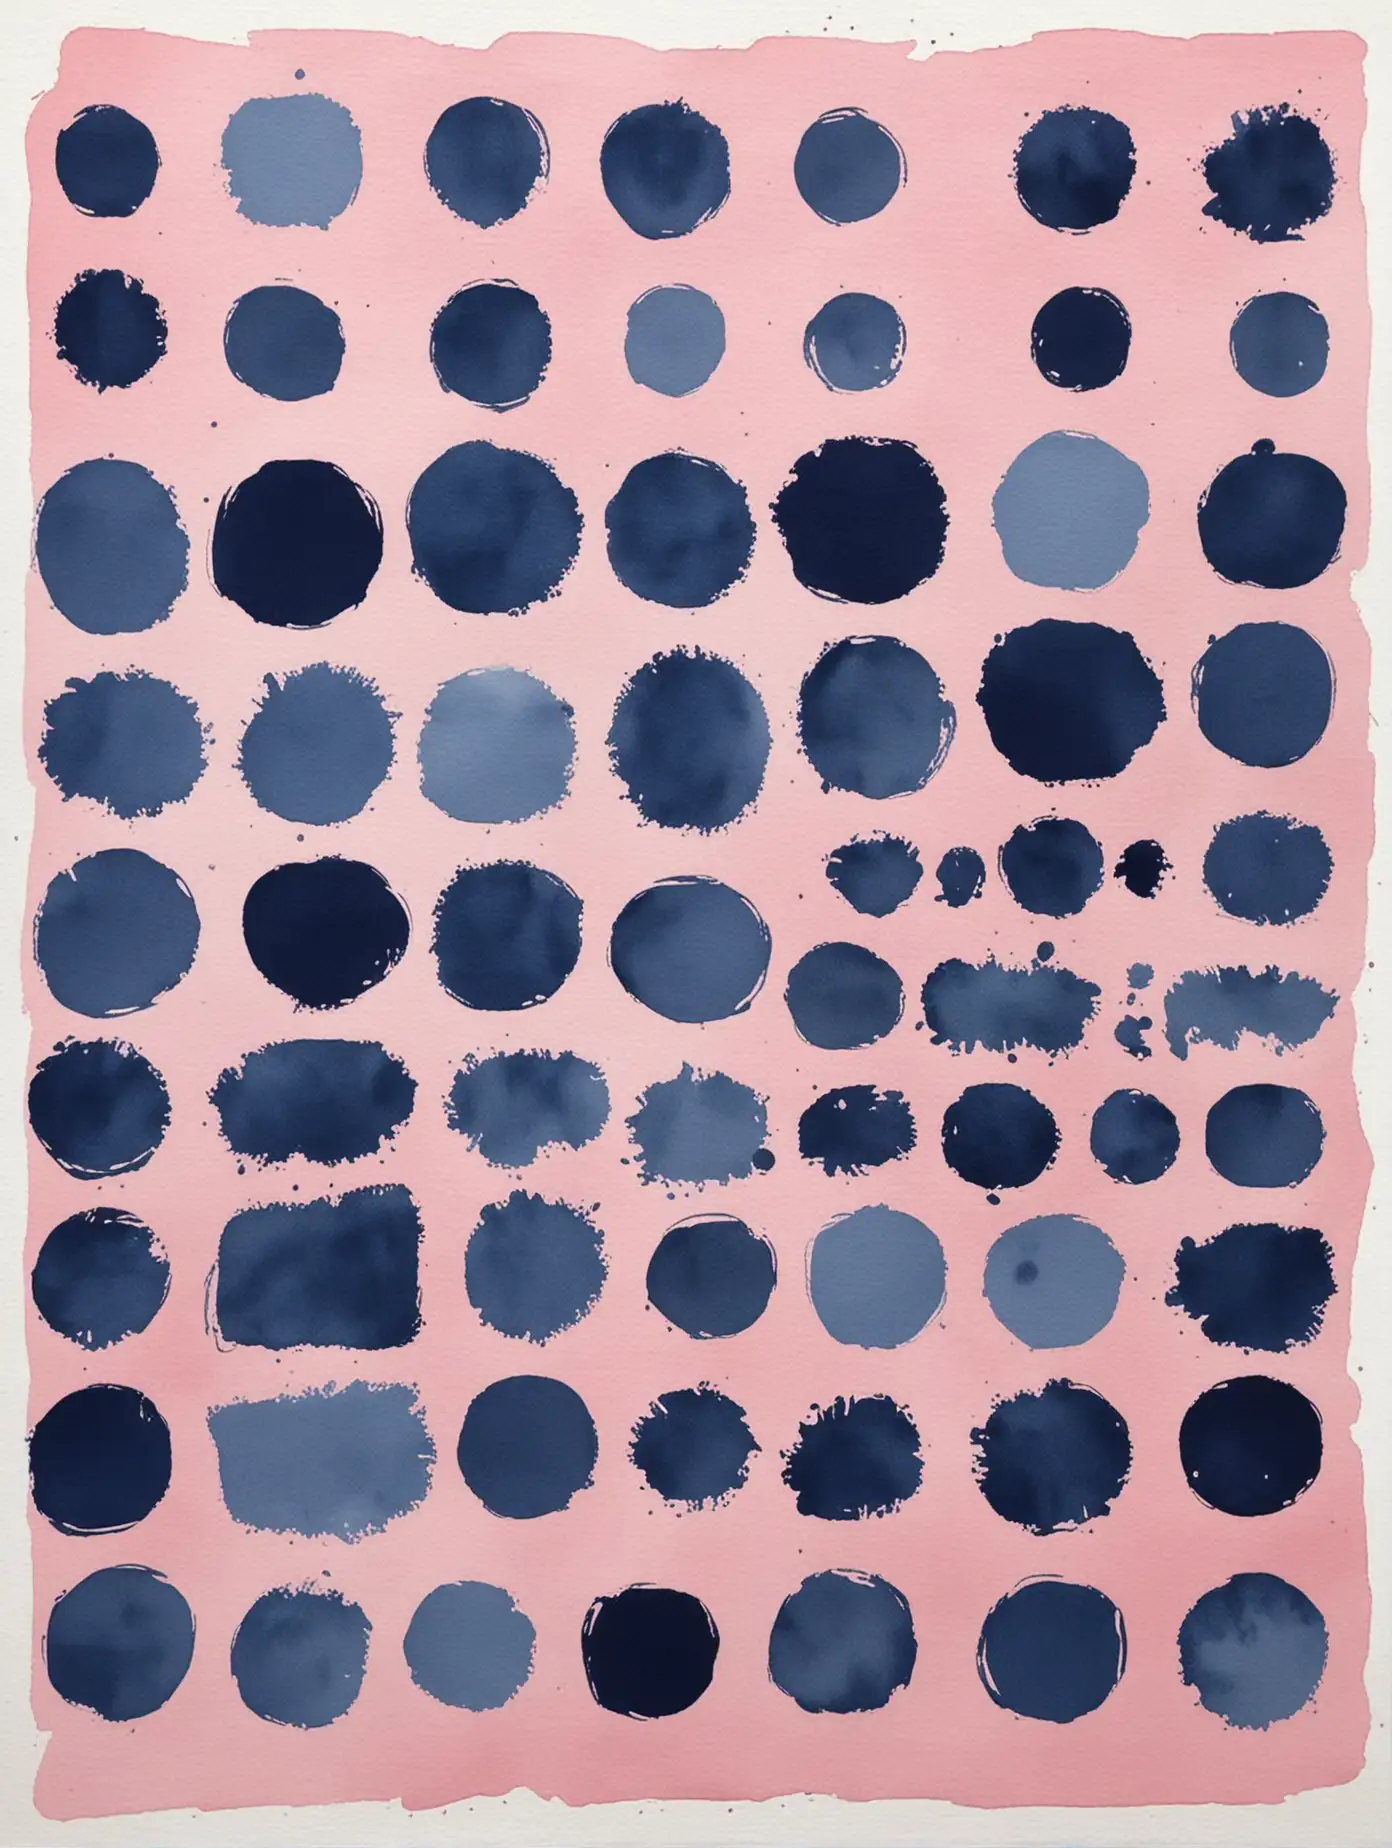 Abstract Watercolor Art in Navy Blue and Light Pink with Thick Paint Strokes